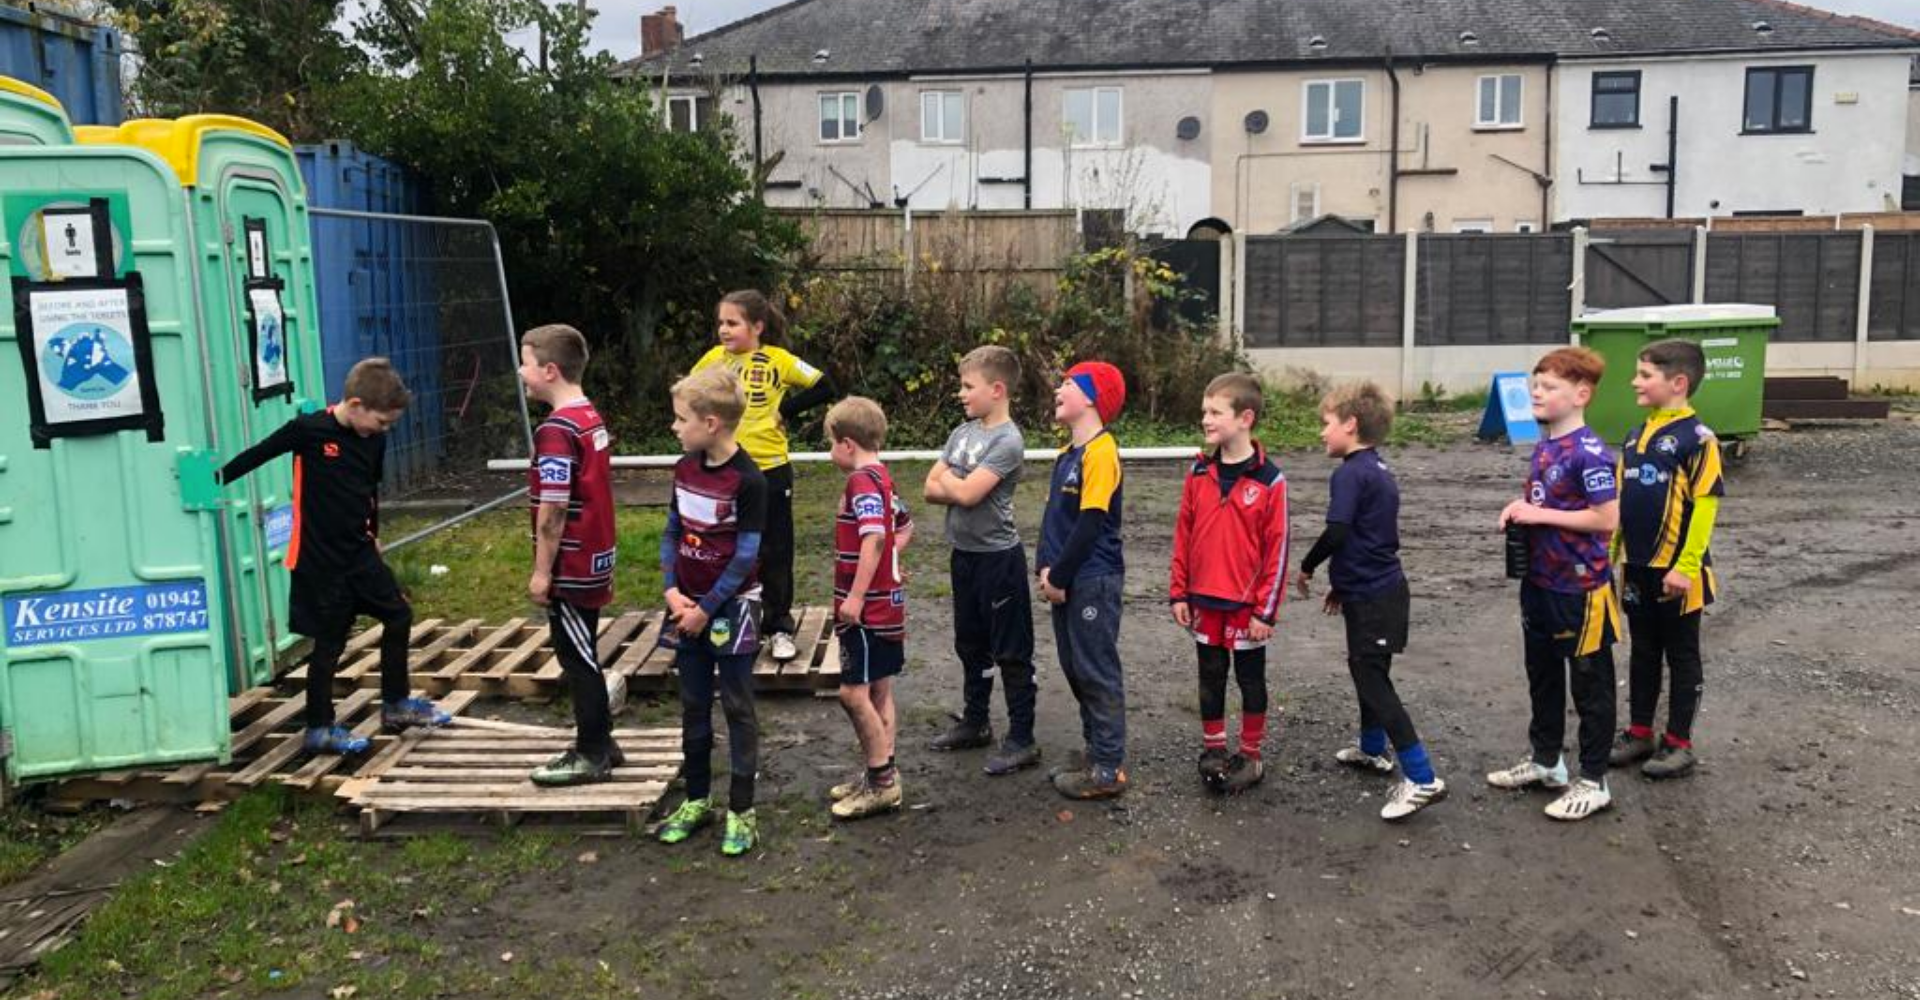 Westhoughton Lions: creating a community clubhouse